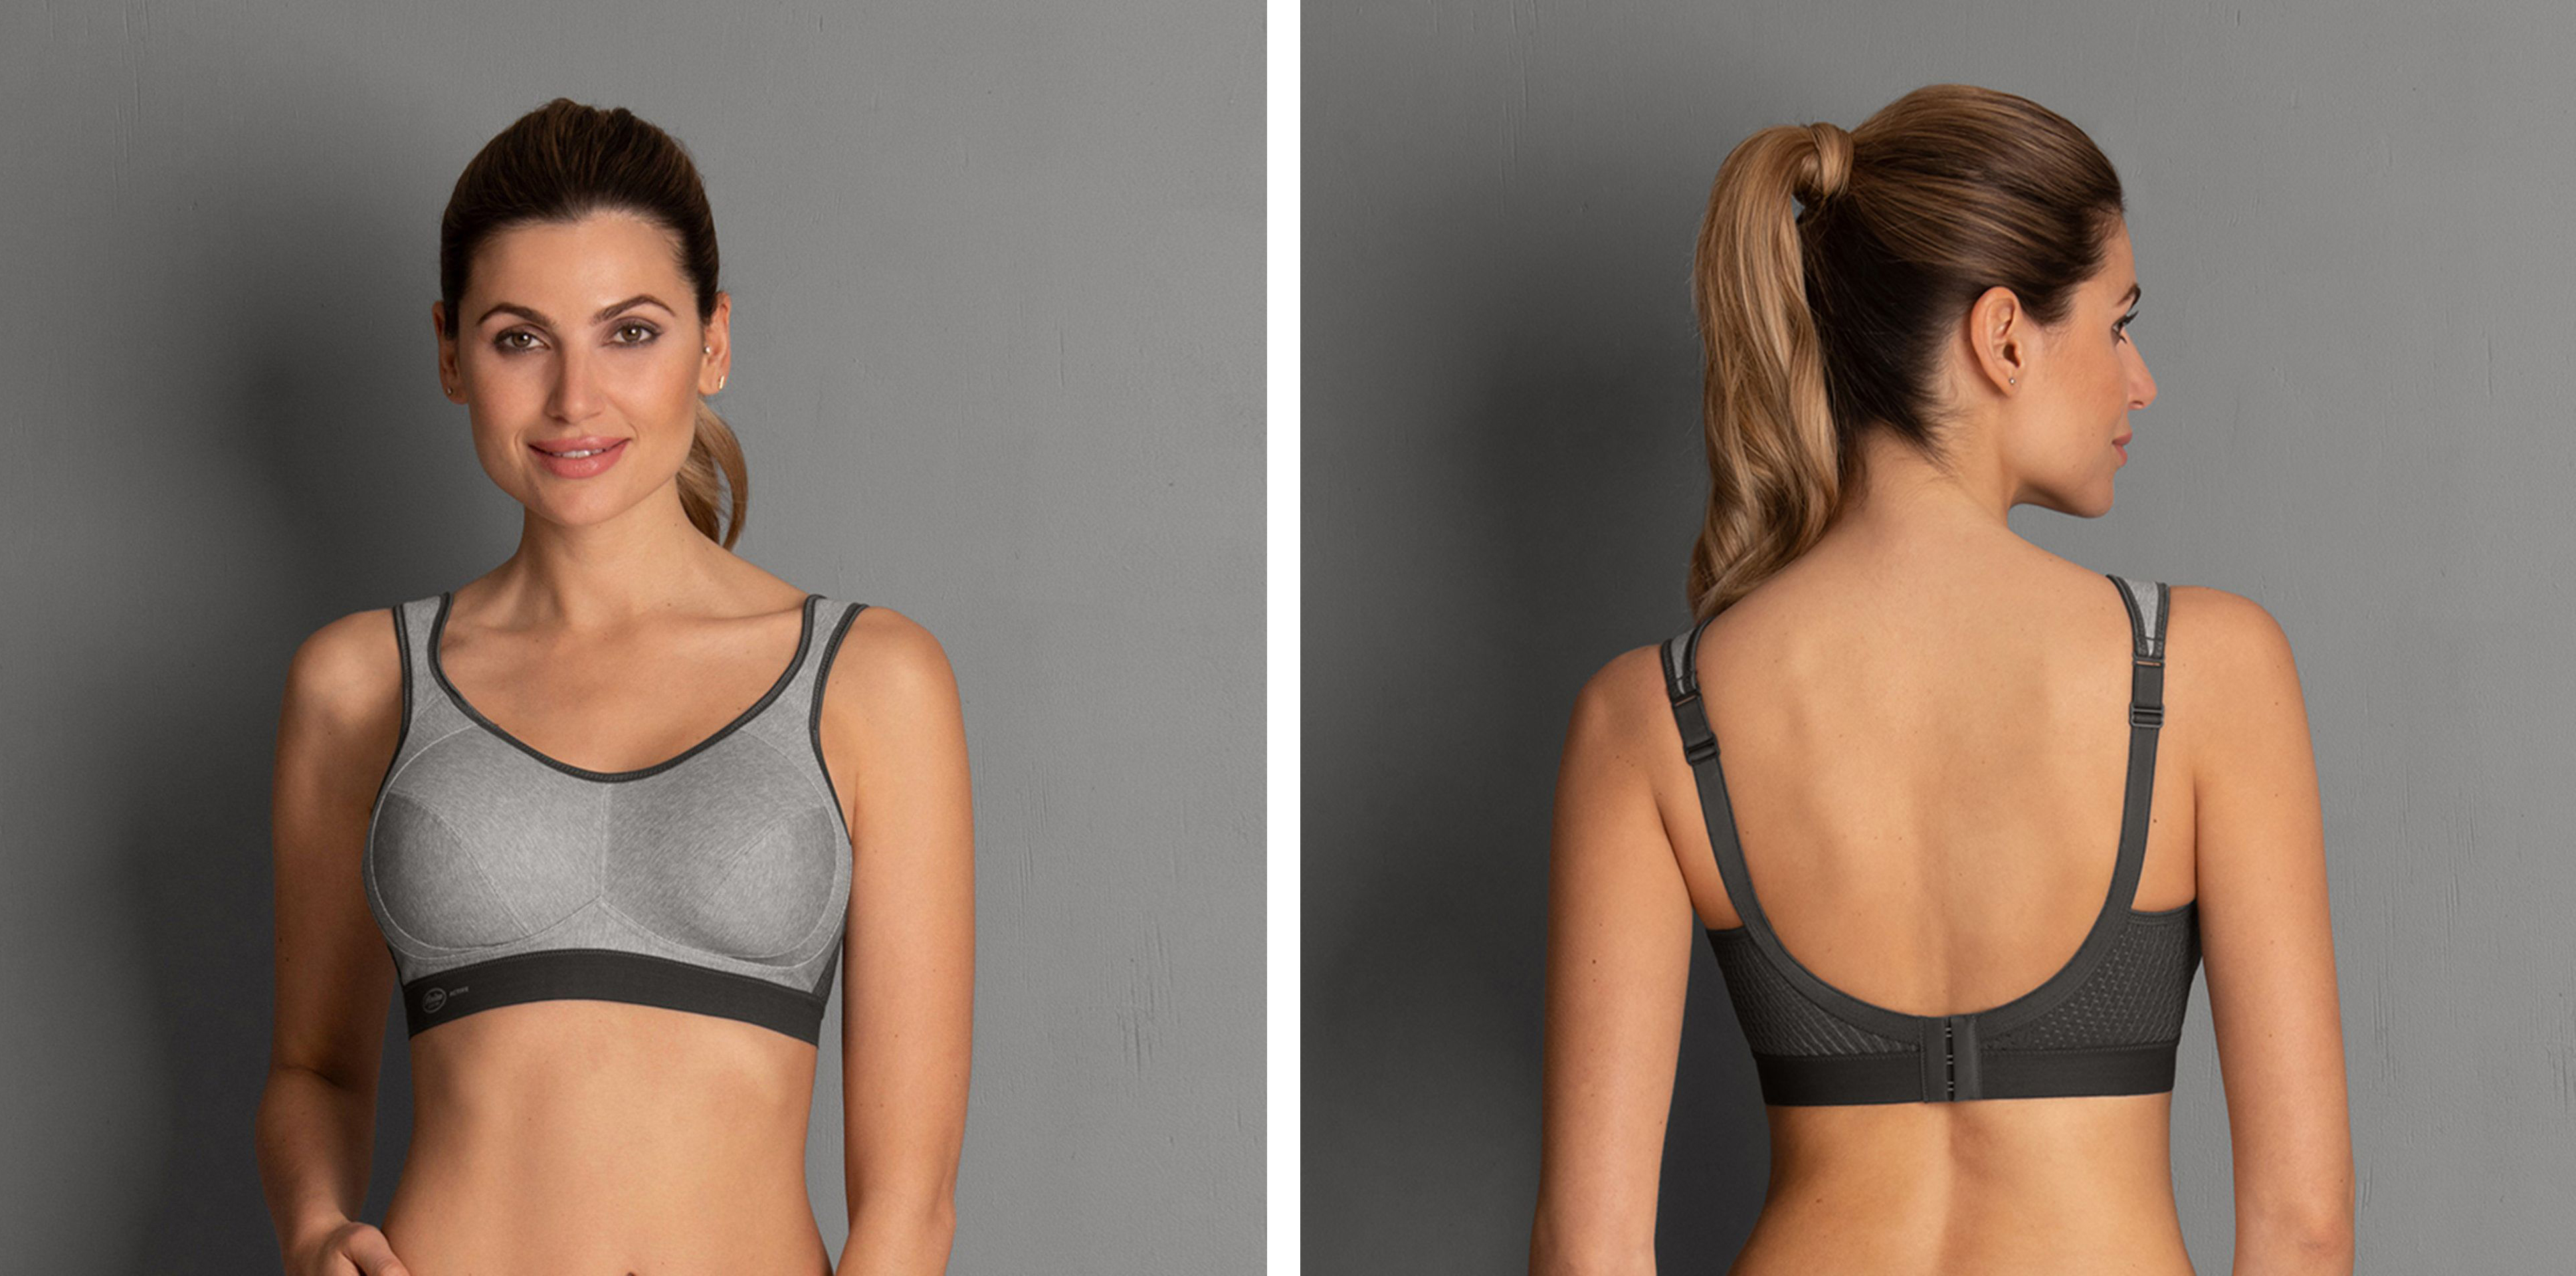 Sports bra designs provided to recruits during the fitting process.